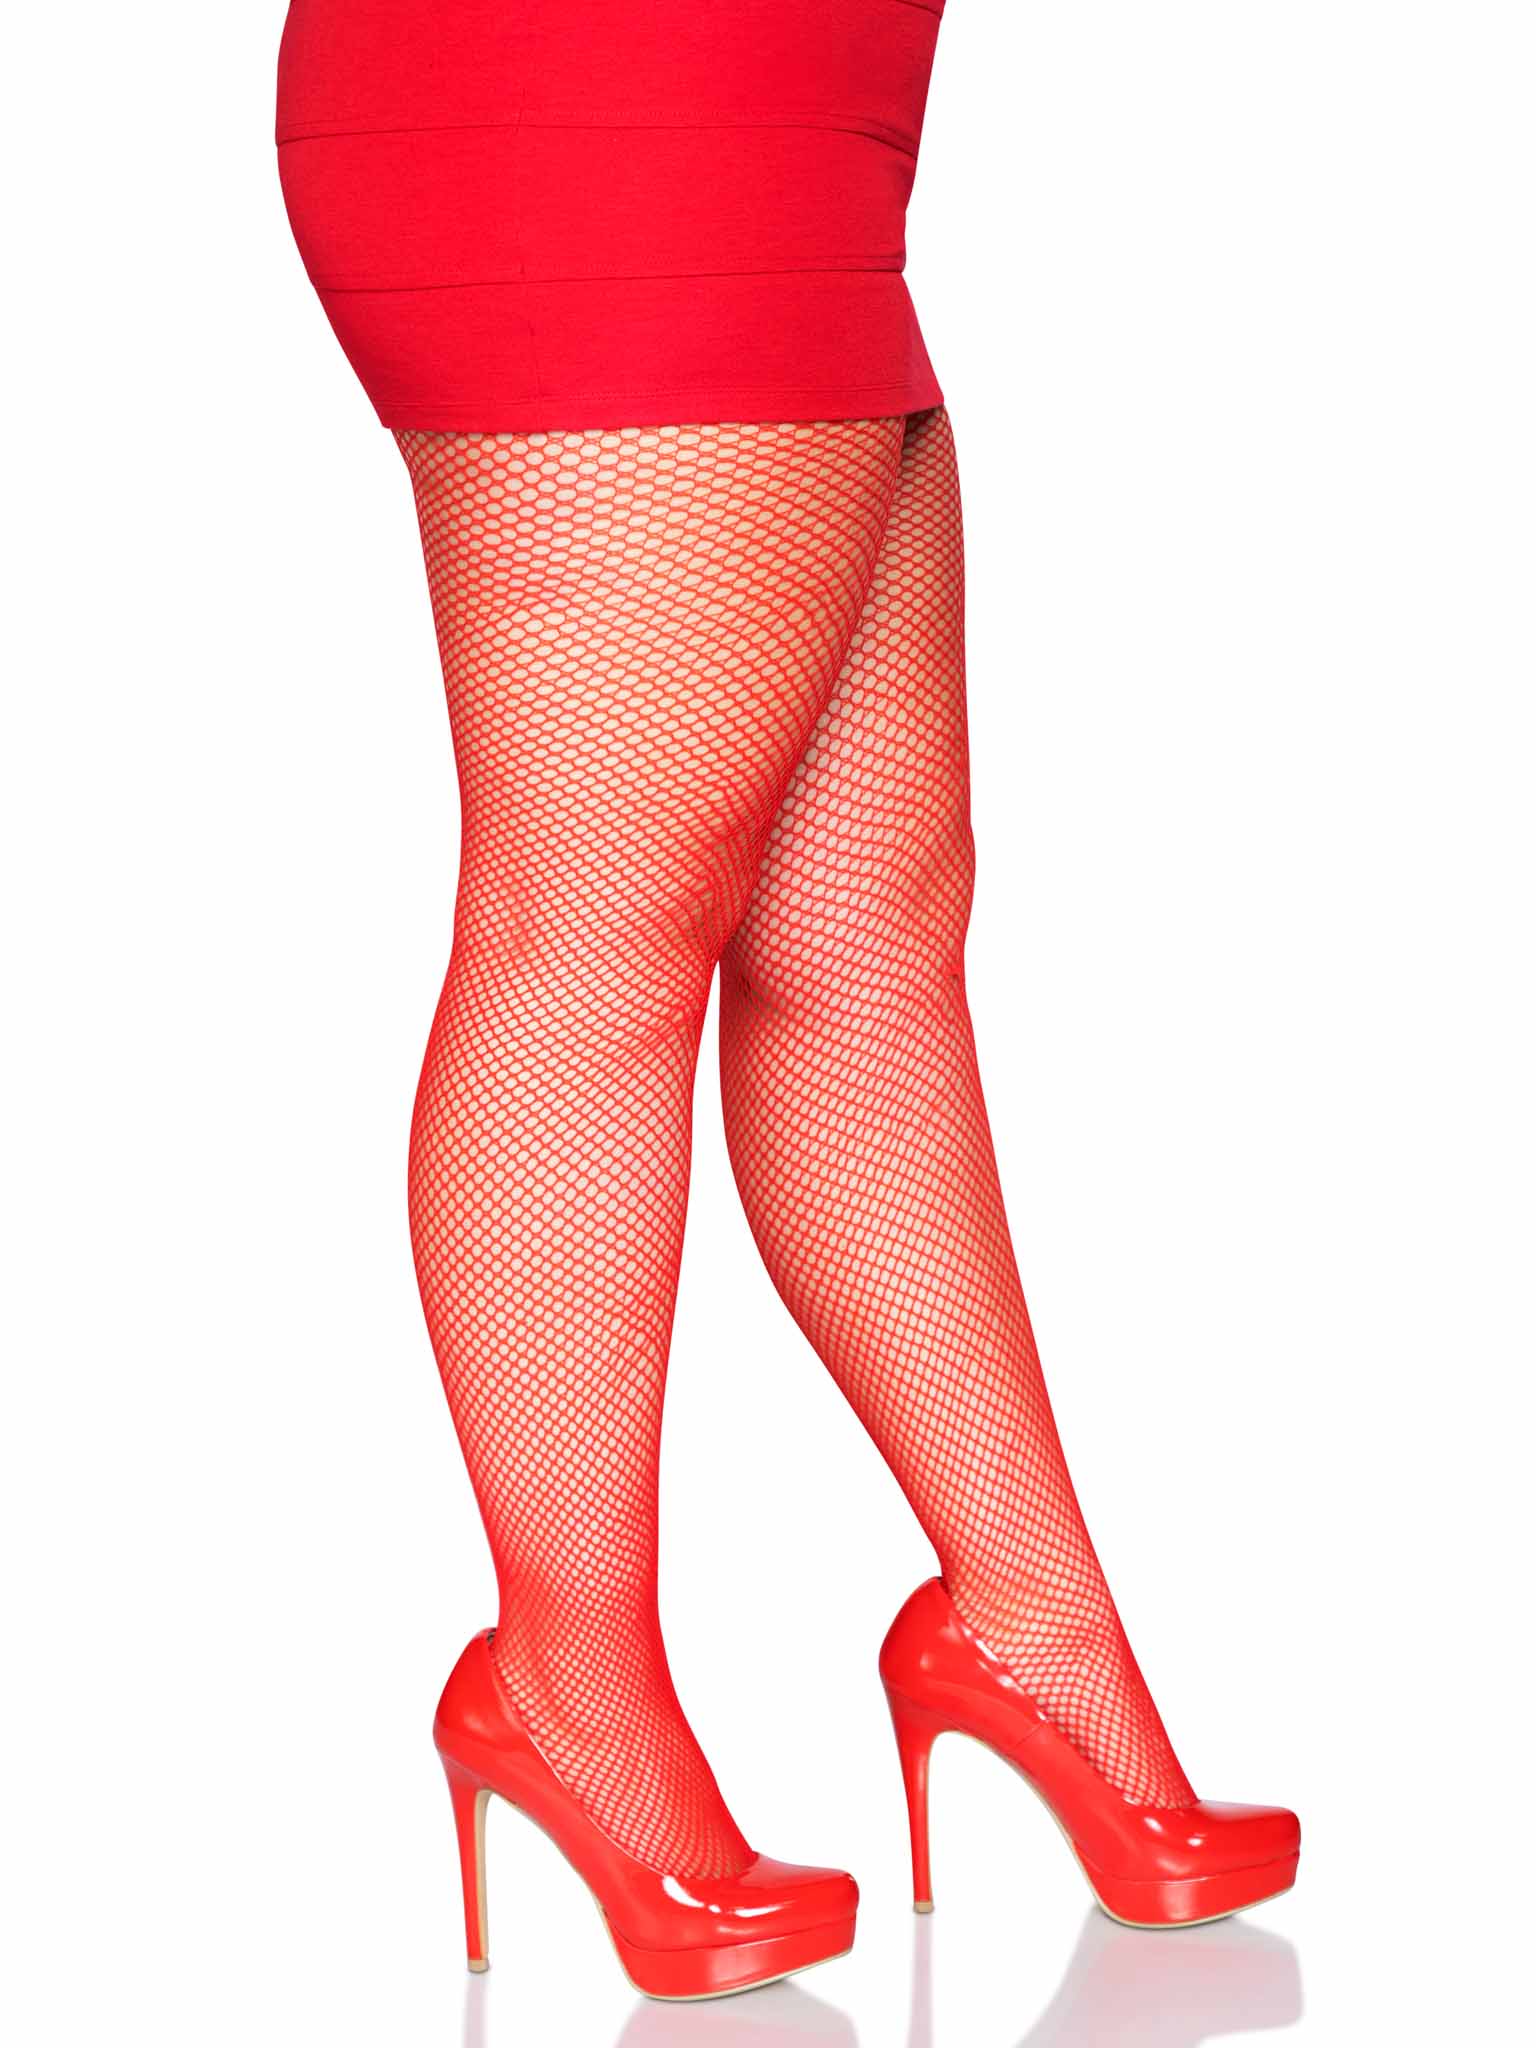 fishnet tights classic micro-net red one-size UK size 6/8/10/12 Y2K rave  retro